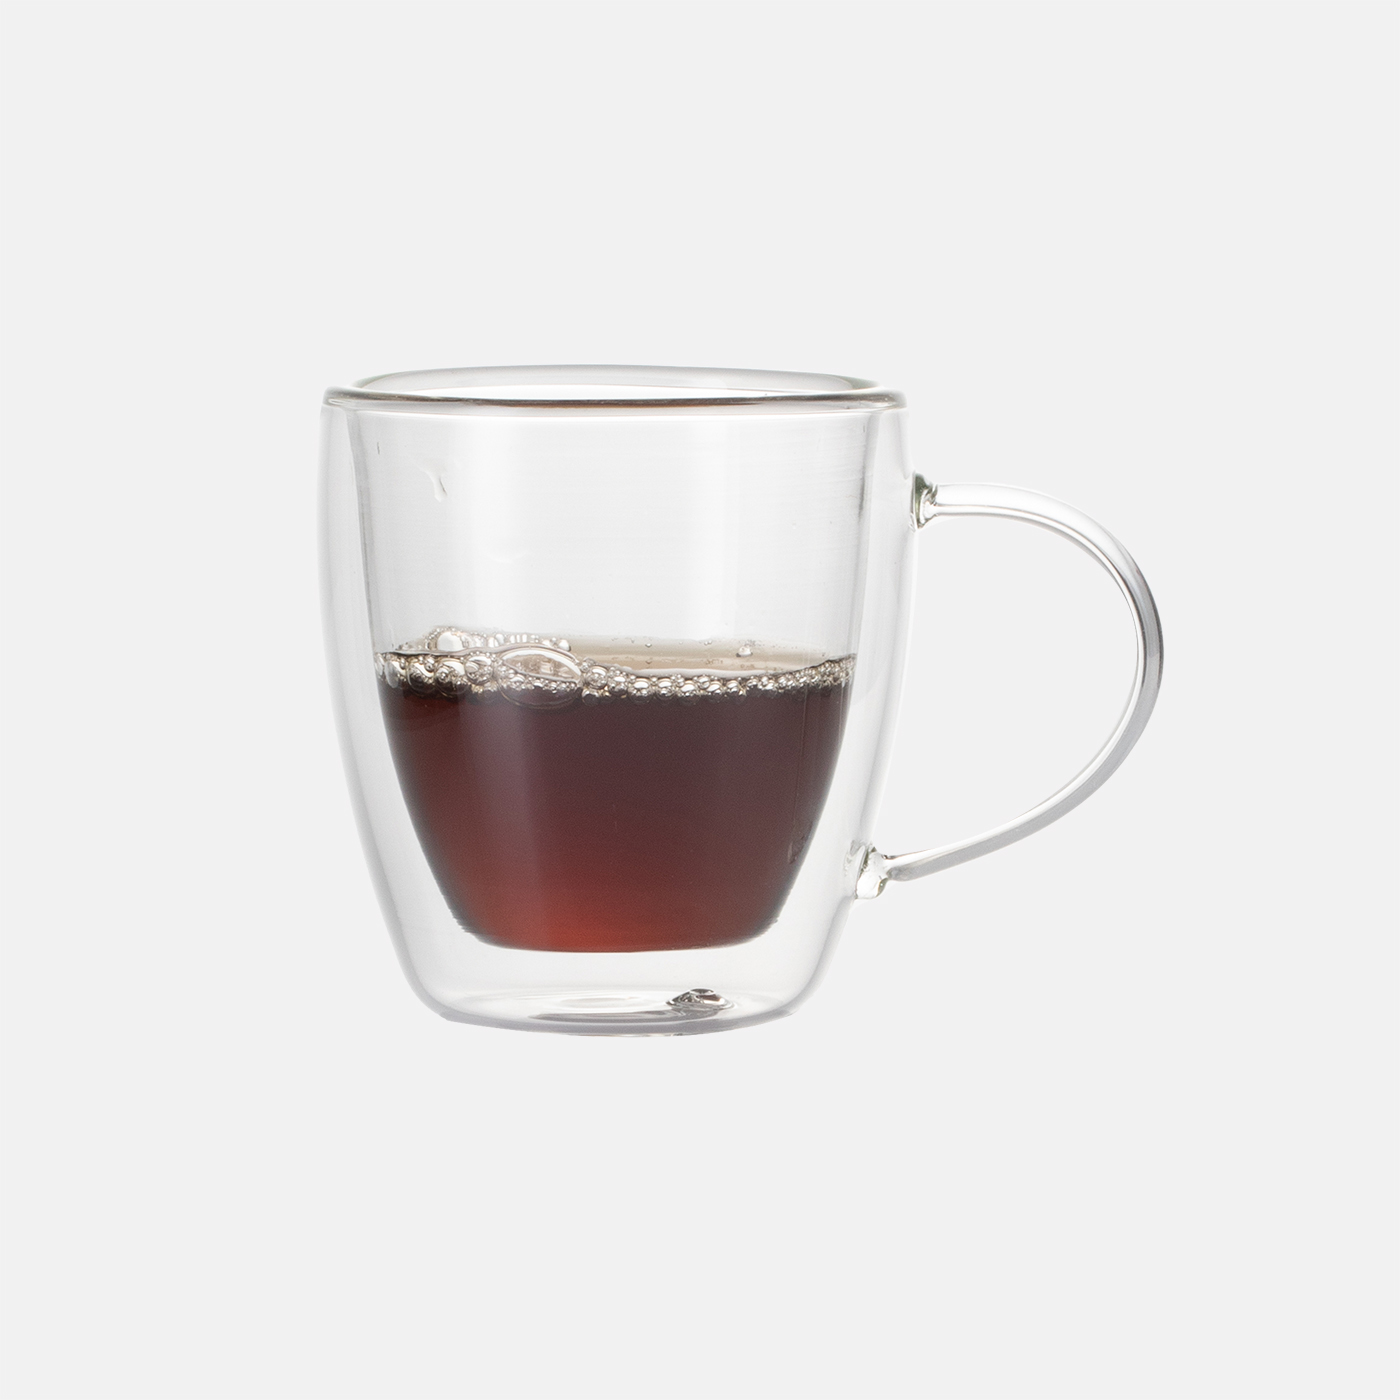 5 oz. Double-Layer Glass Coffee Cup With Handle3